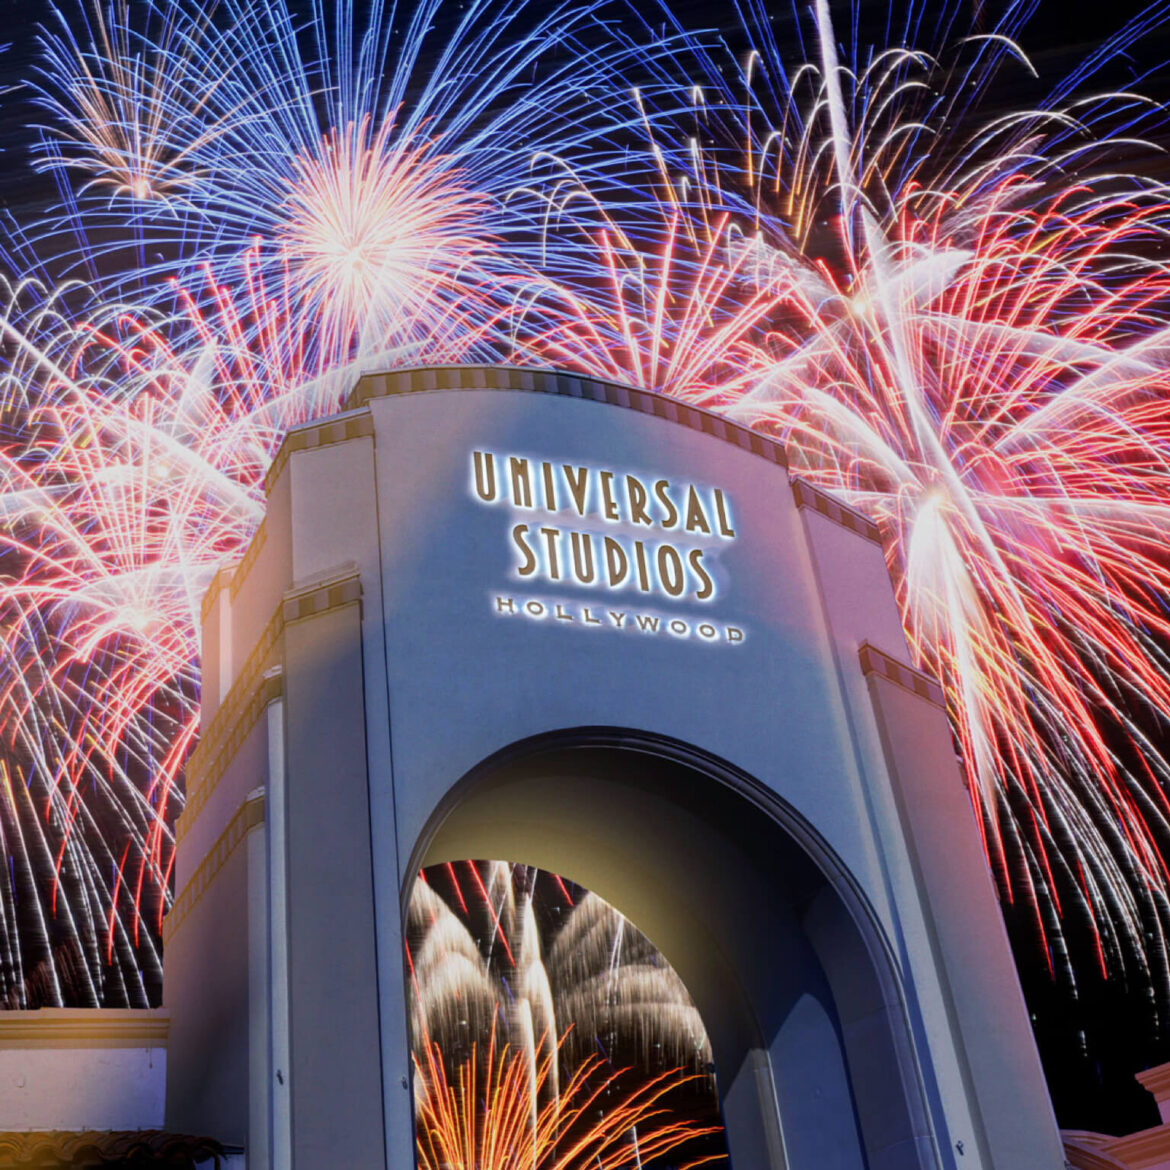 Universal Studios Hollywood Extends the July 4th Celebrations All Weekend Long from July 2nd – 4th